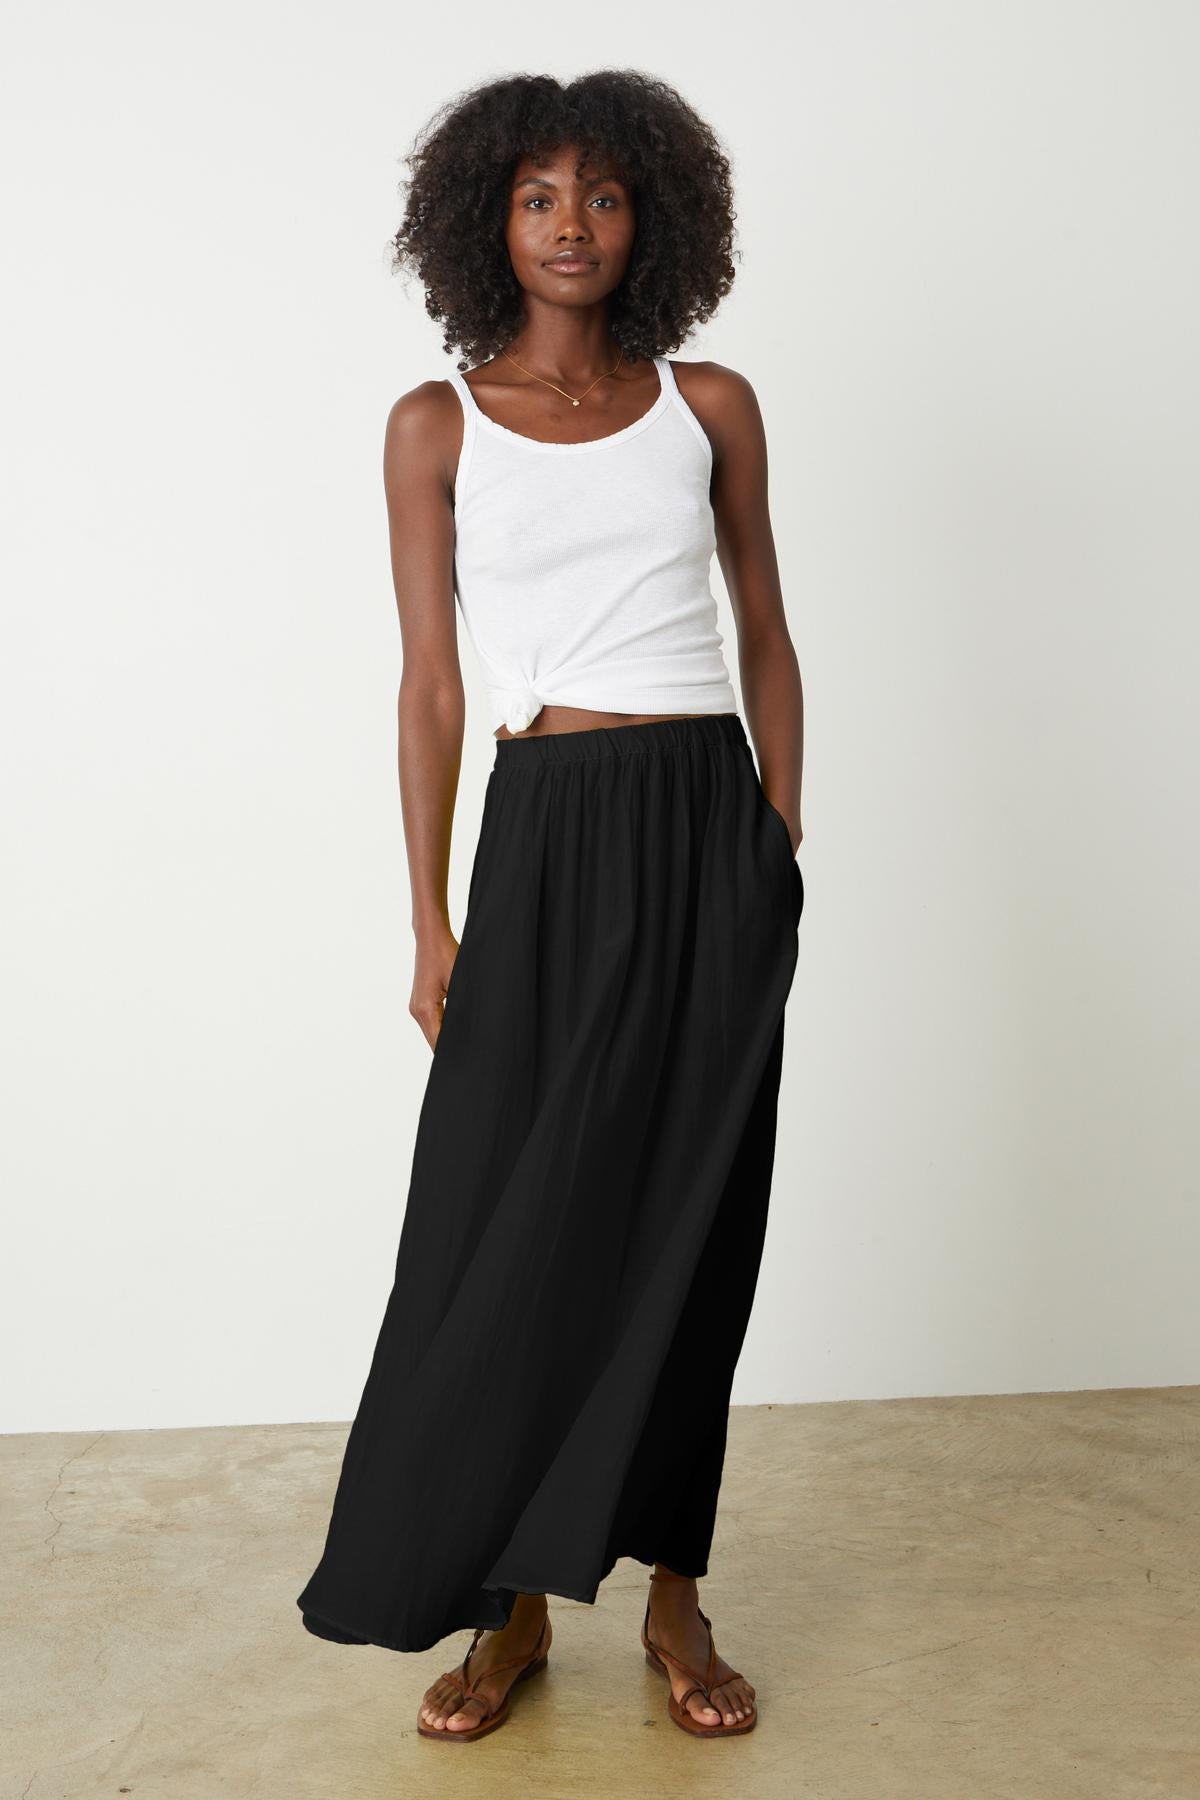   A woman wearing a black Velvet by Graham & Spencer MARIELA MAXI SKIRT and white tank top tied in front 